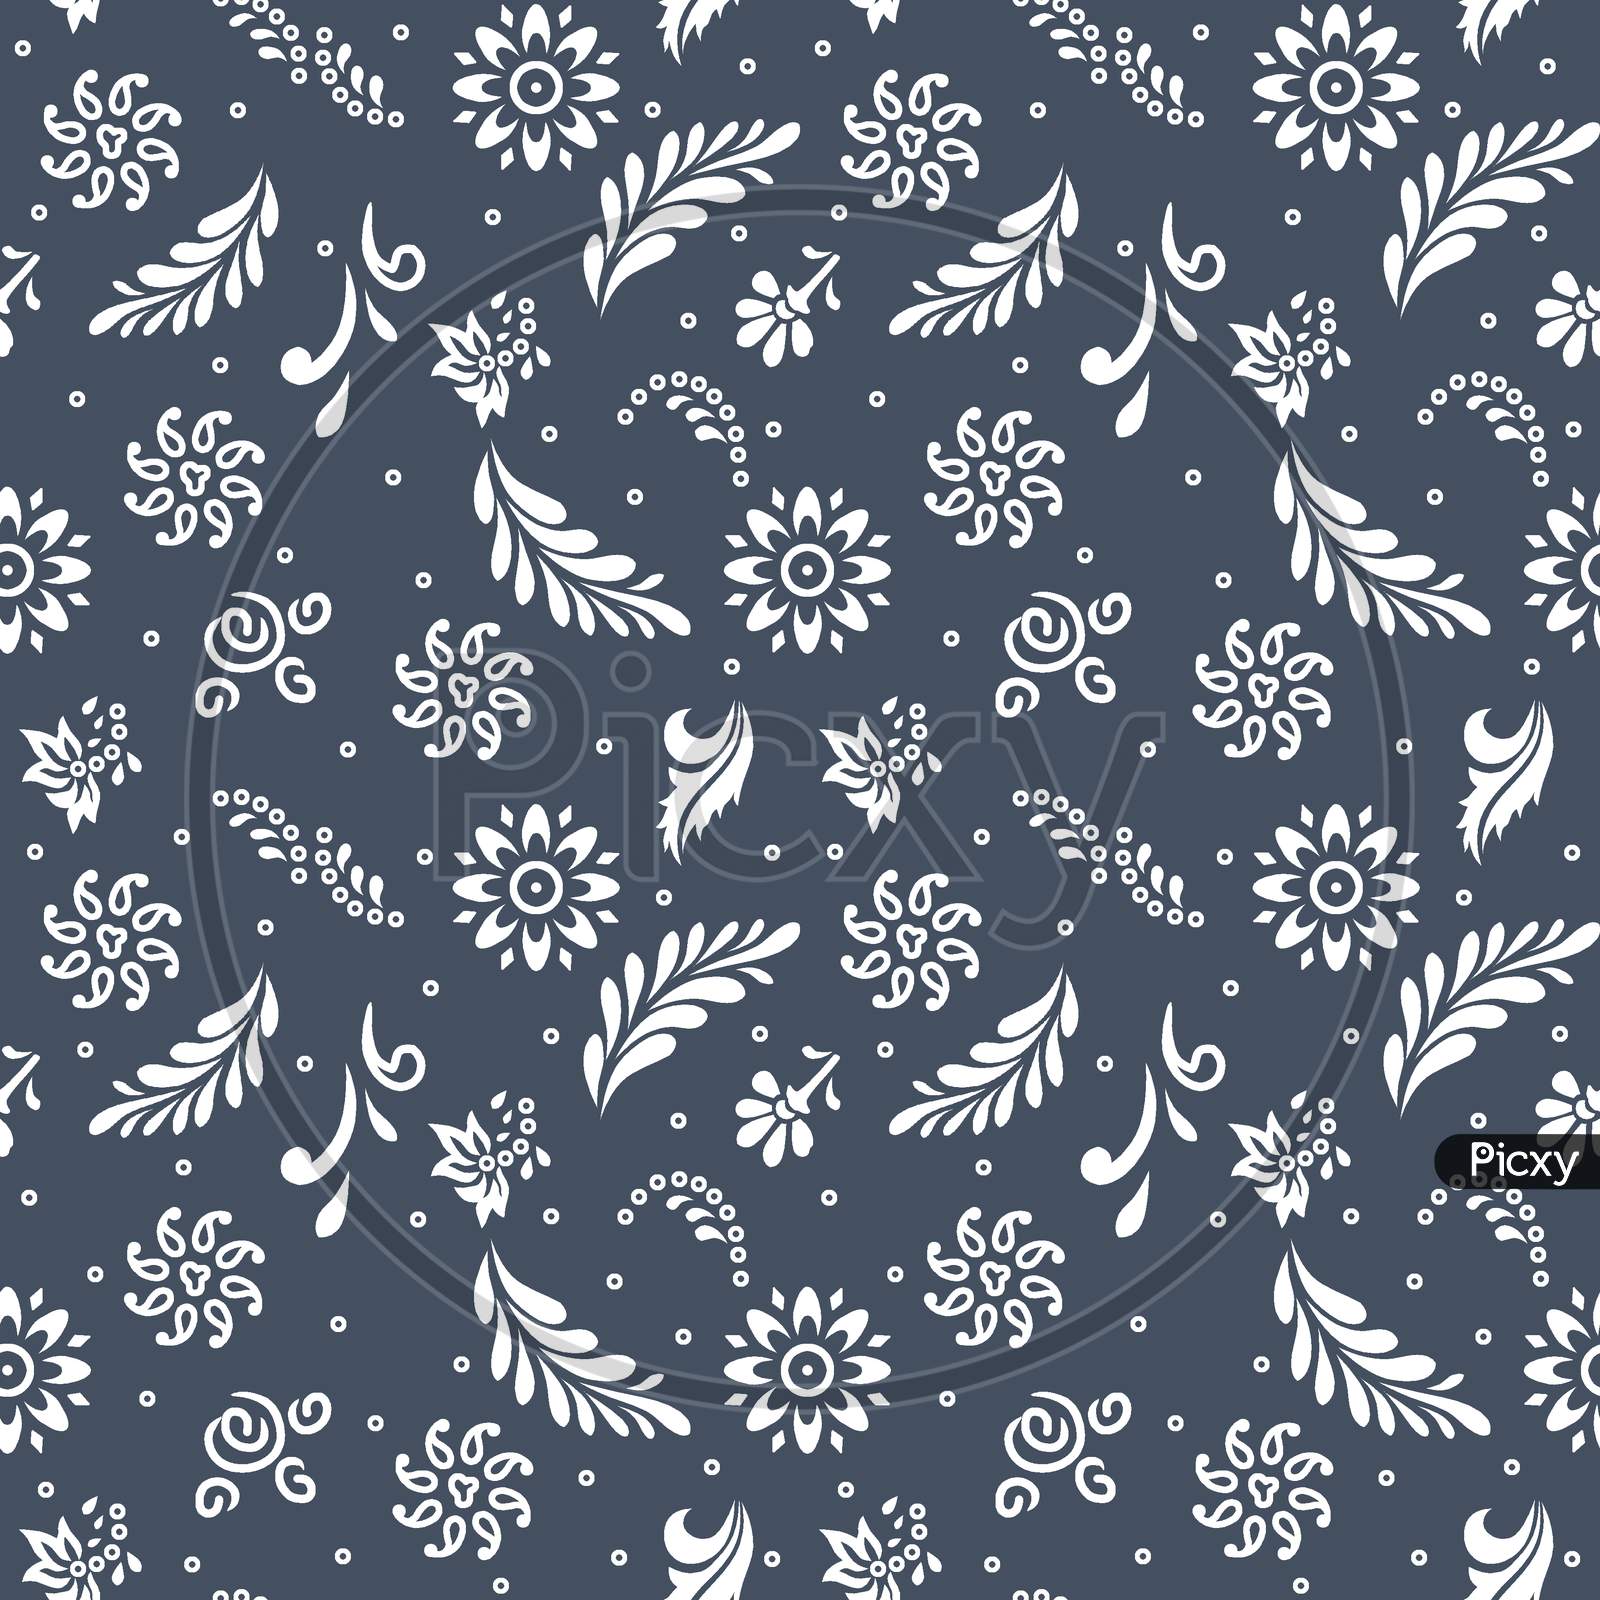 Seamless Floral Design With Grey Background